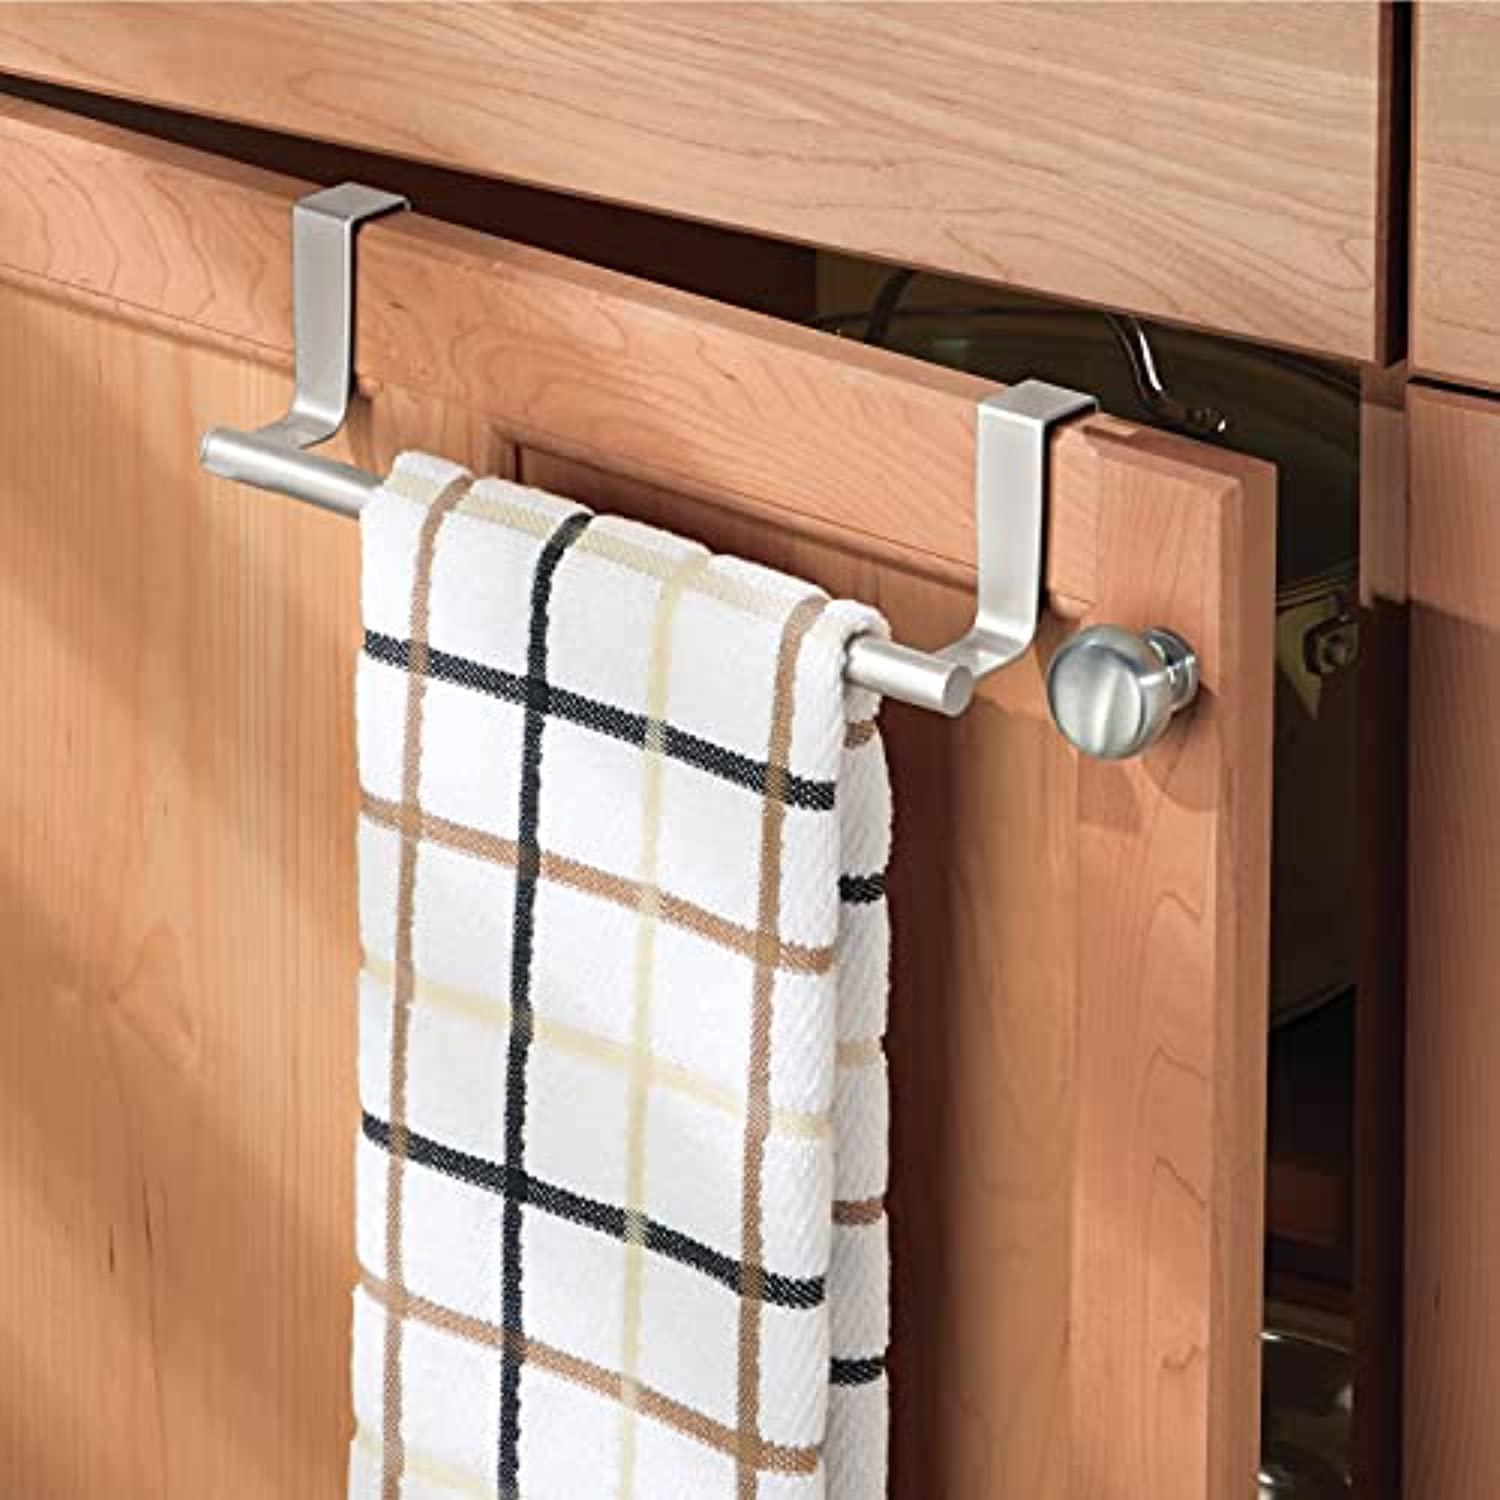 mdesign decorative metal kitchen over cabinet towel bar - hang on inside or outside of doors, storage and display rack for ha